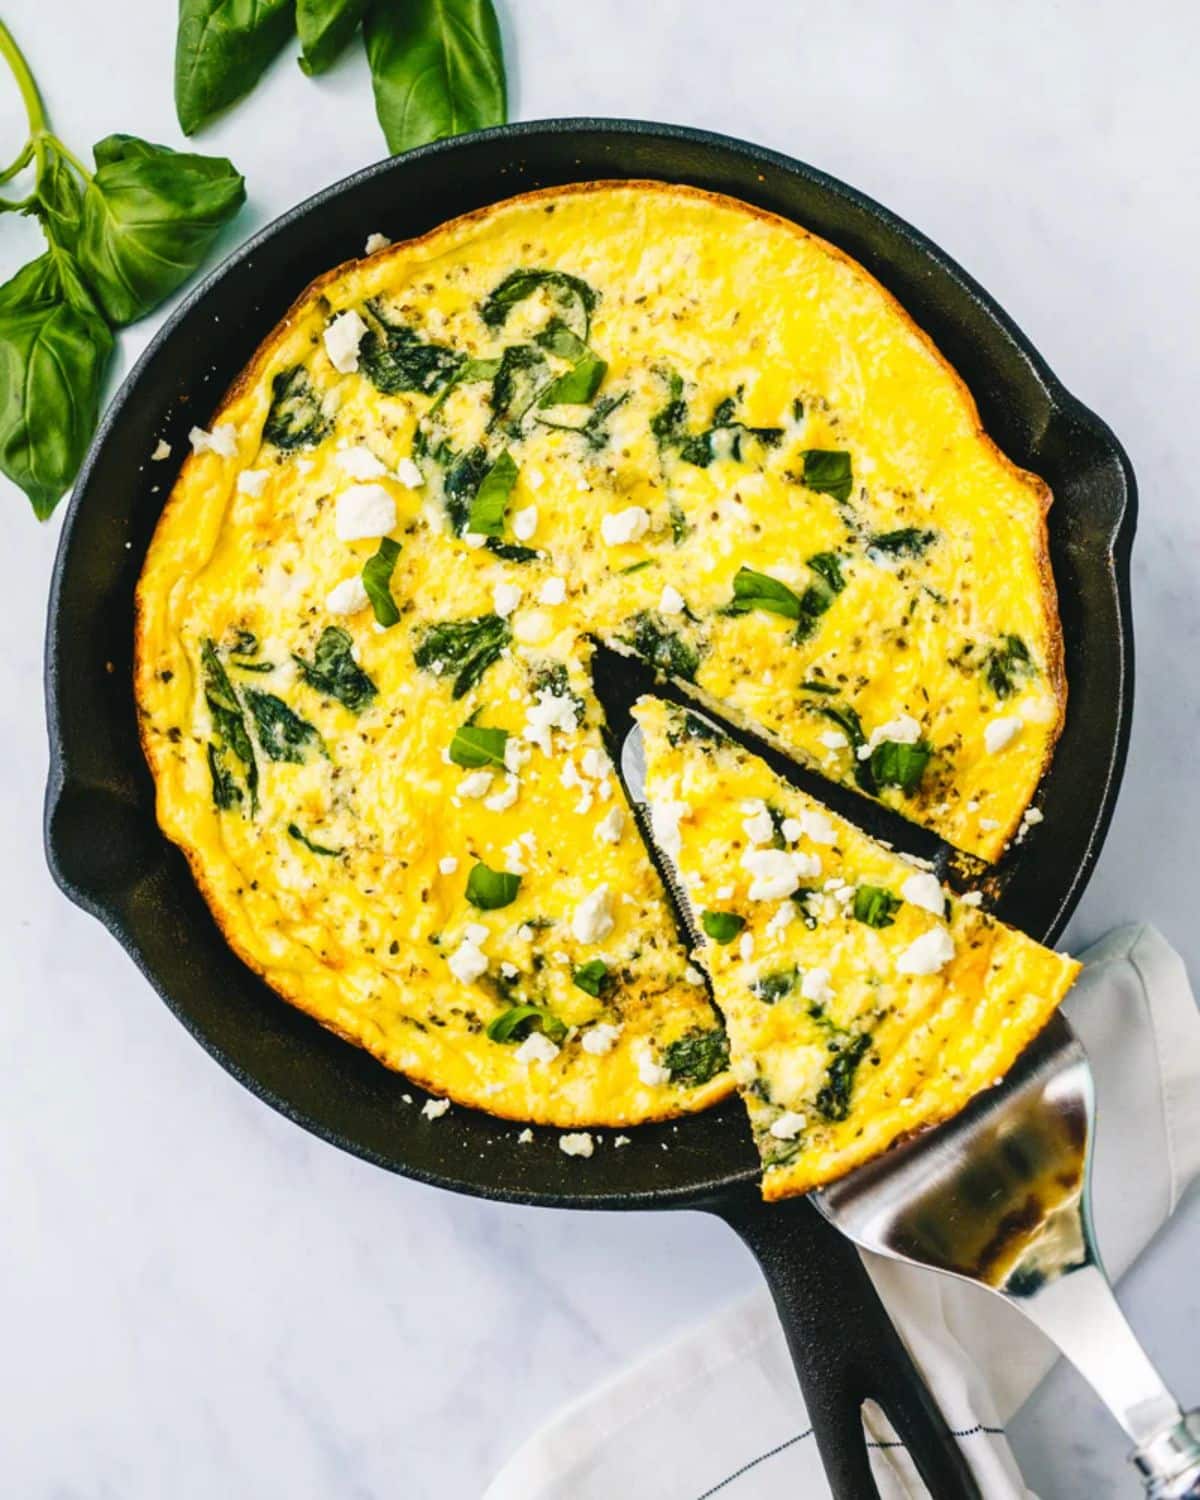 Flavorful easy frittata in a black skillet picked by a spatula.